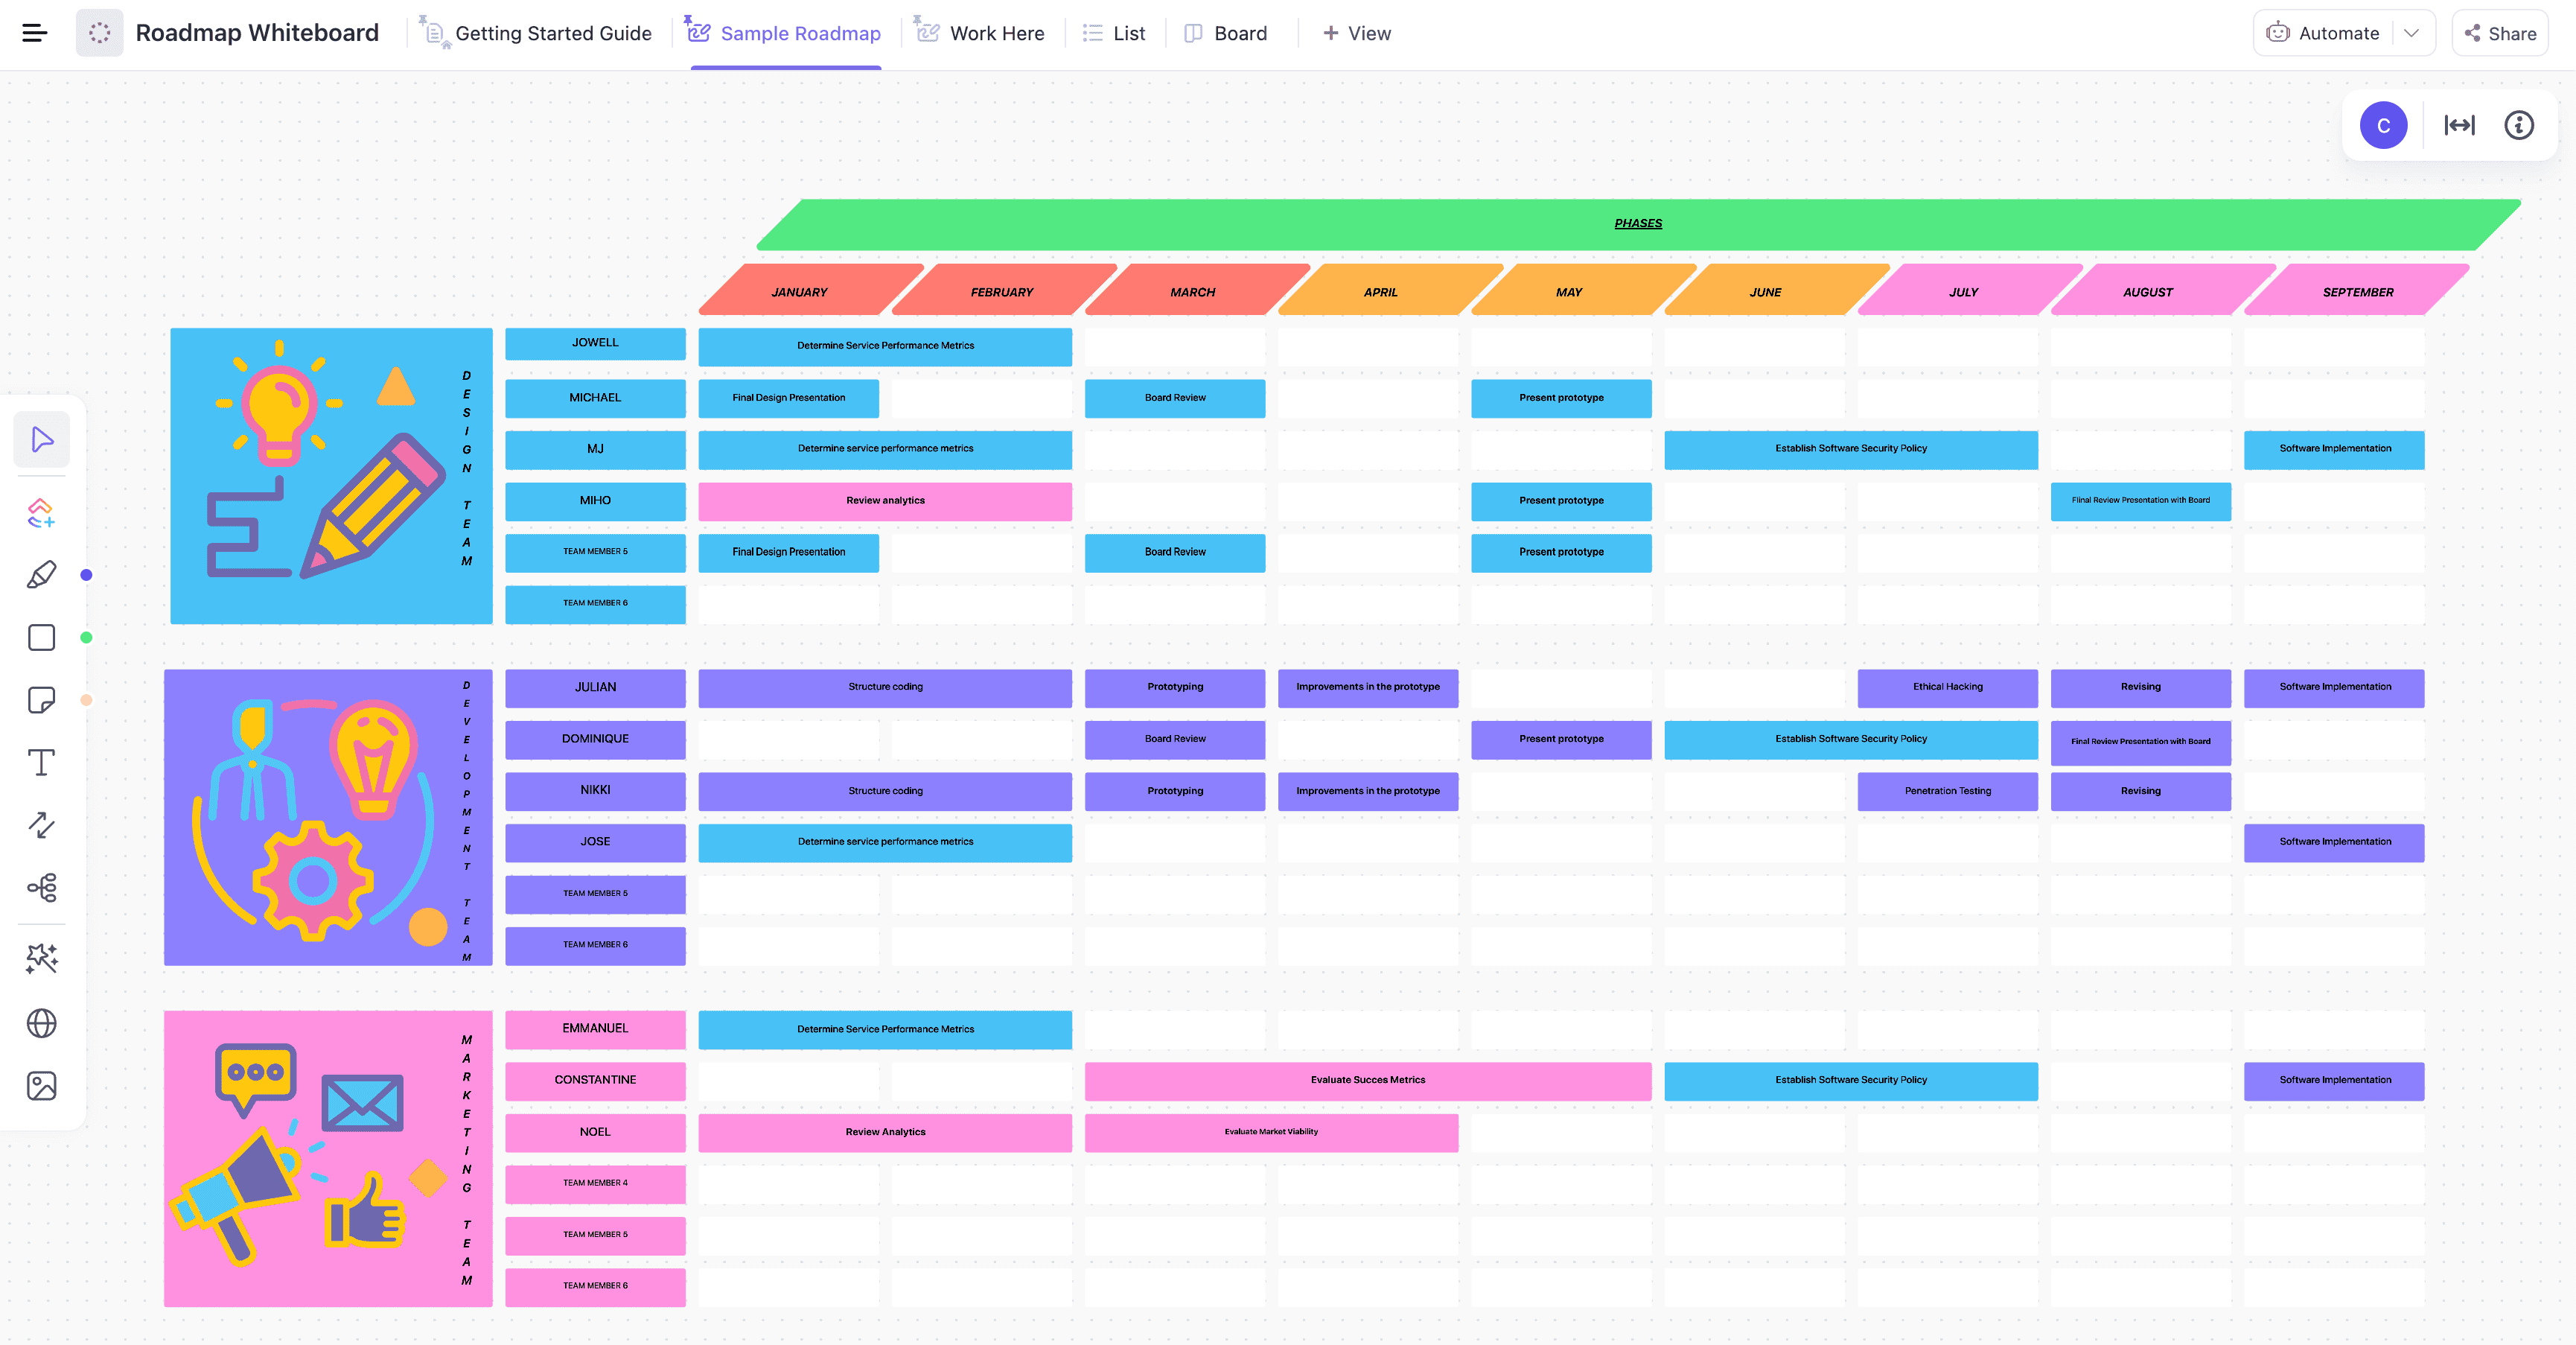 You can now create a visually appealing road map for your new product, project, or plan. This Whiteboard enables you to keep track of the life cycle of a new product along with the people involved to make it happen. A finished roadmap serves as guidance for future project management of new products.